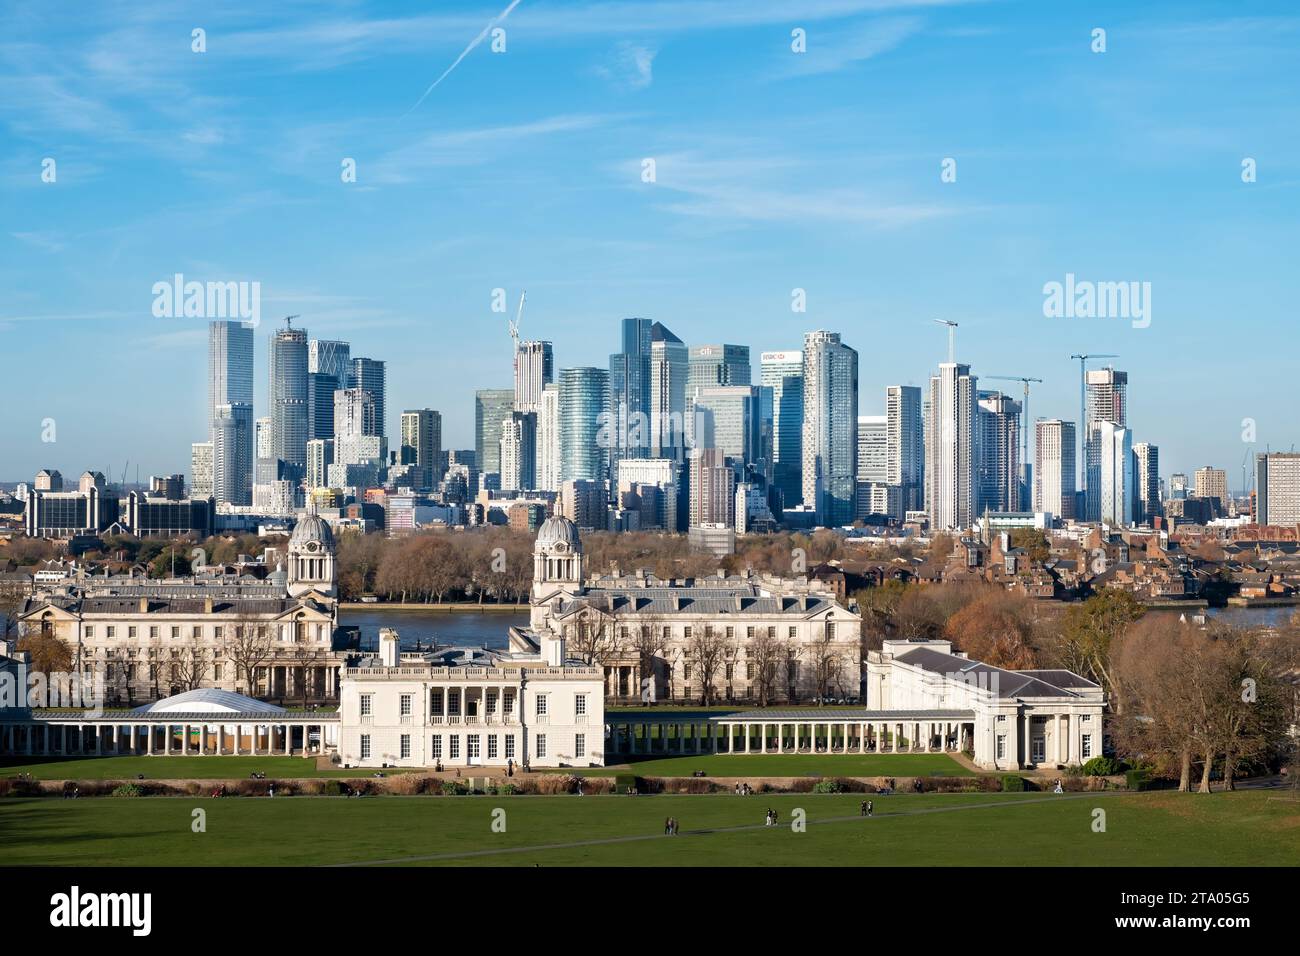 A view from Greenwich Park, London looking across the Old Royal Naval College towards the skyscrapers in the Canary Wharf business district Stock Photo